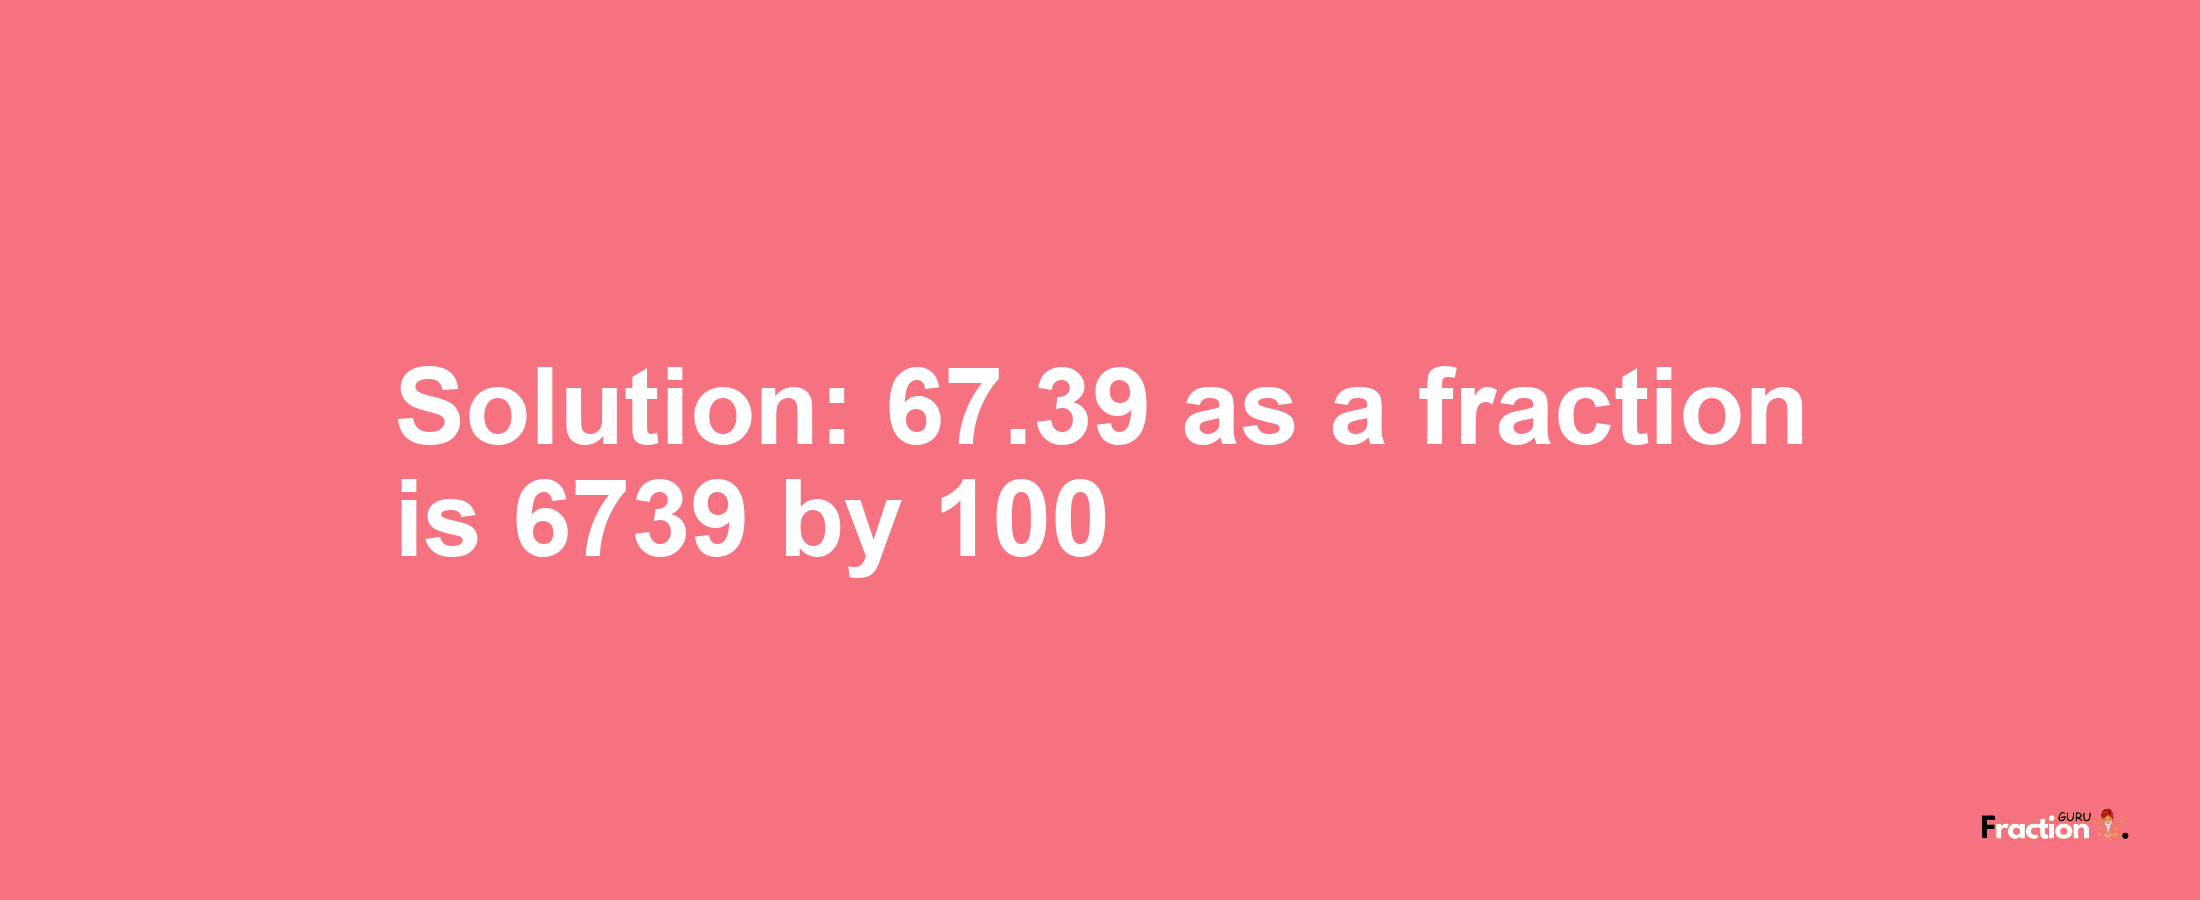 Solution:67.39 as a fraction is 6739/100